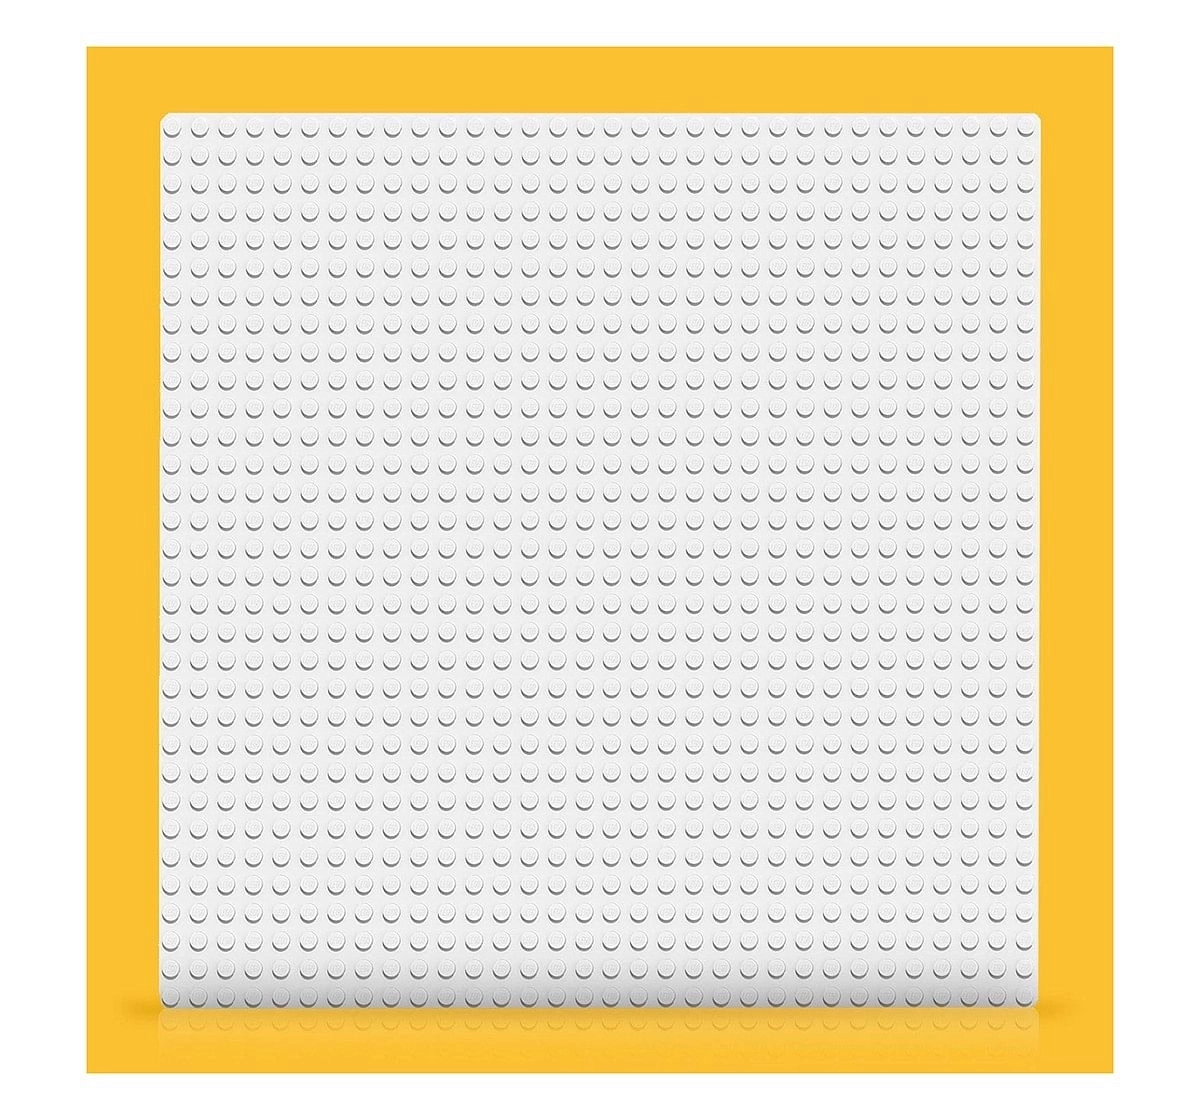  Lego Classic White Baseplate 11010 Blocks for Kids age 4Y+ 